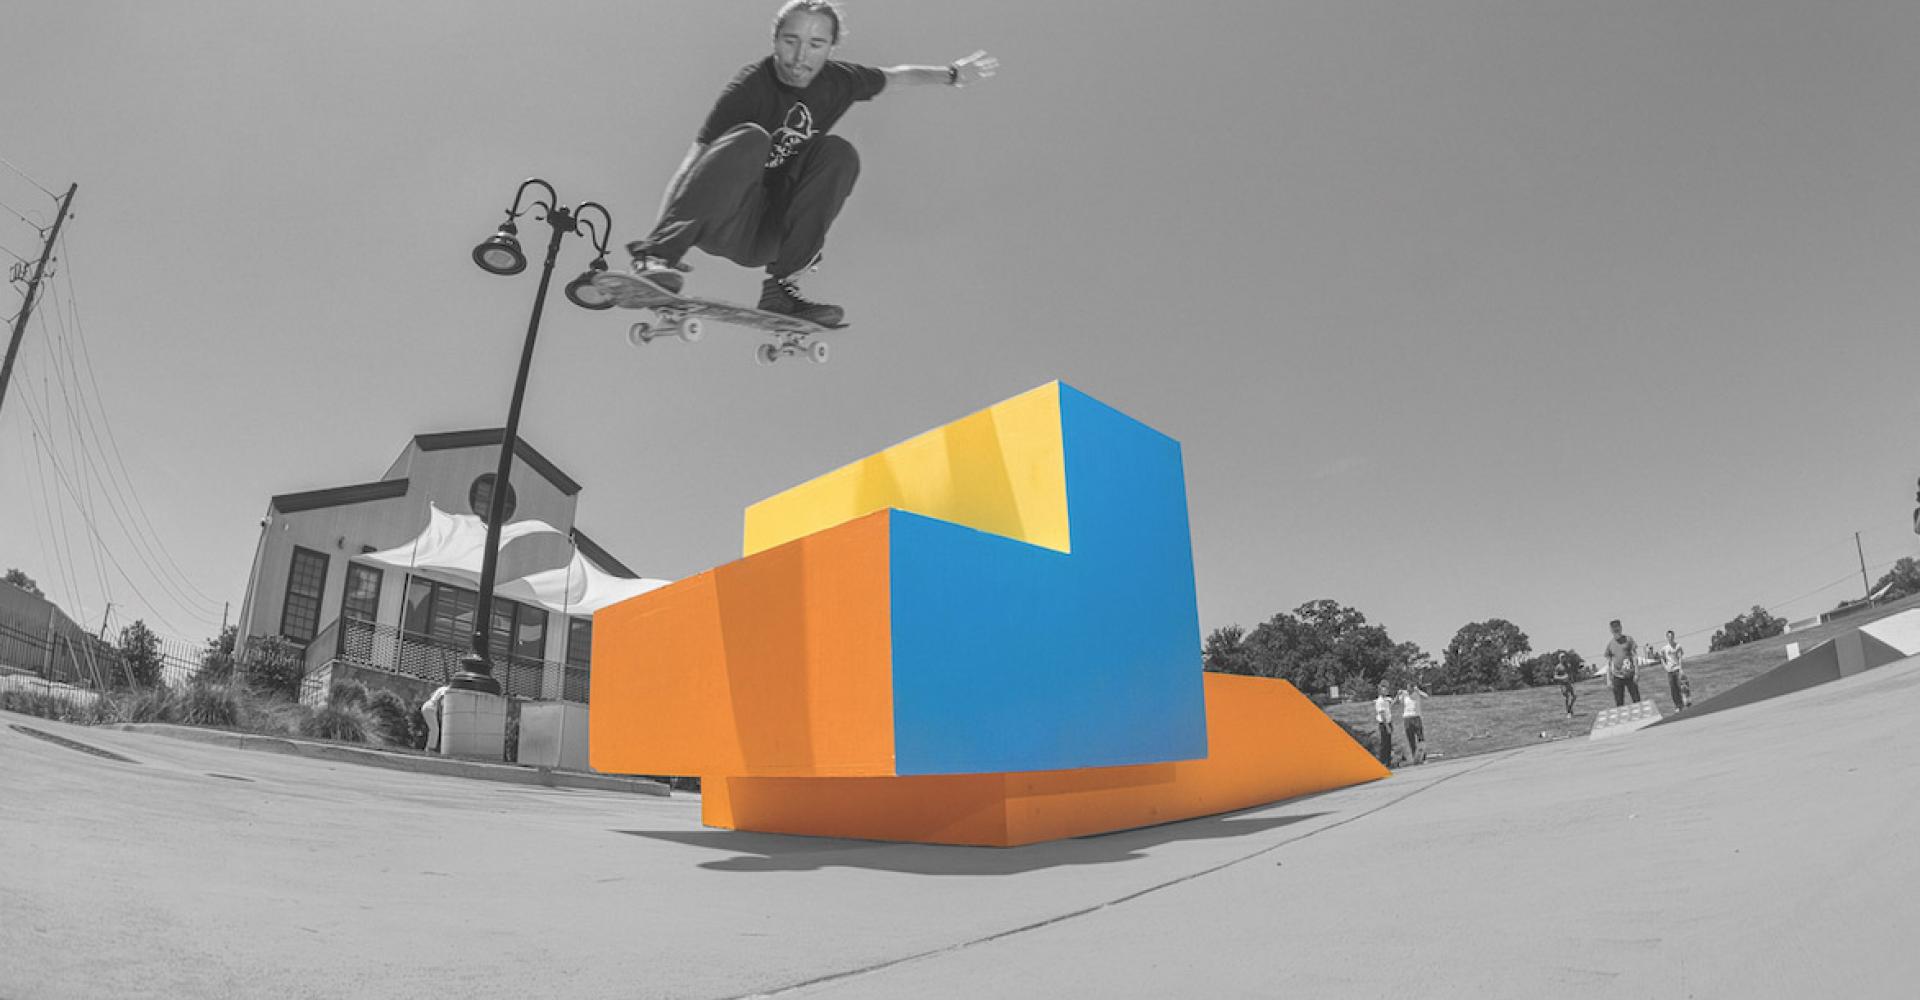 black and white photo of man jumping skateboard over colourful ramp